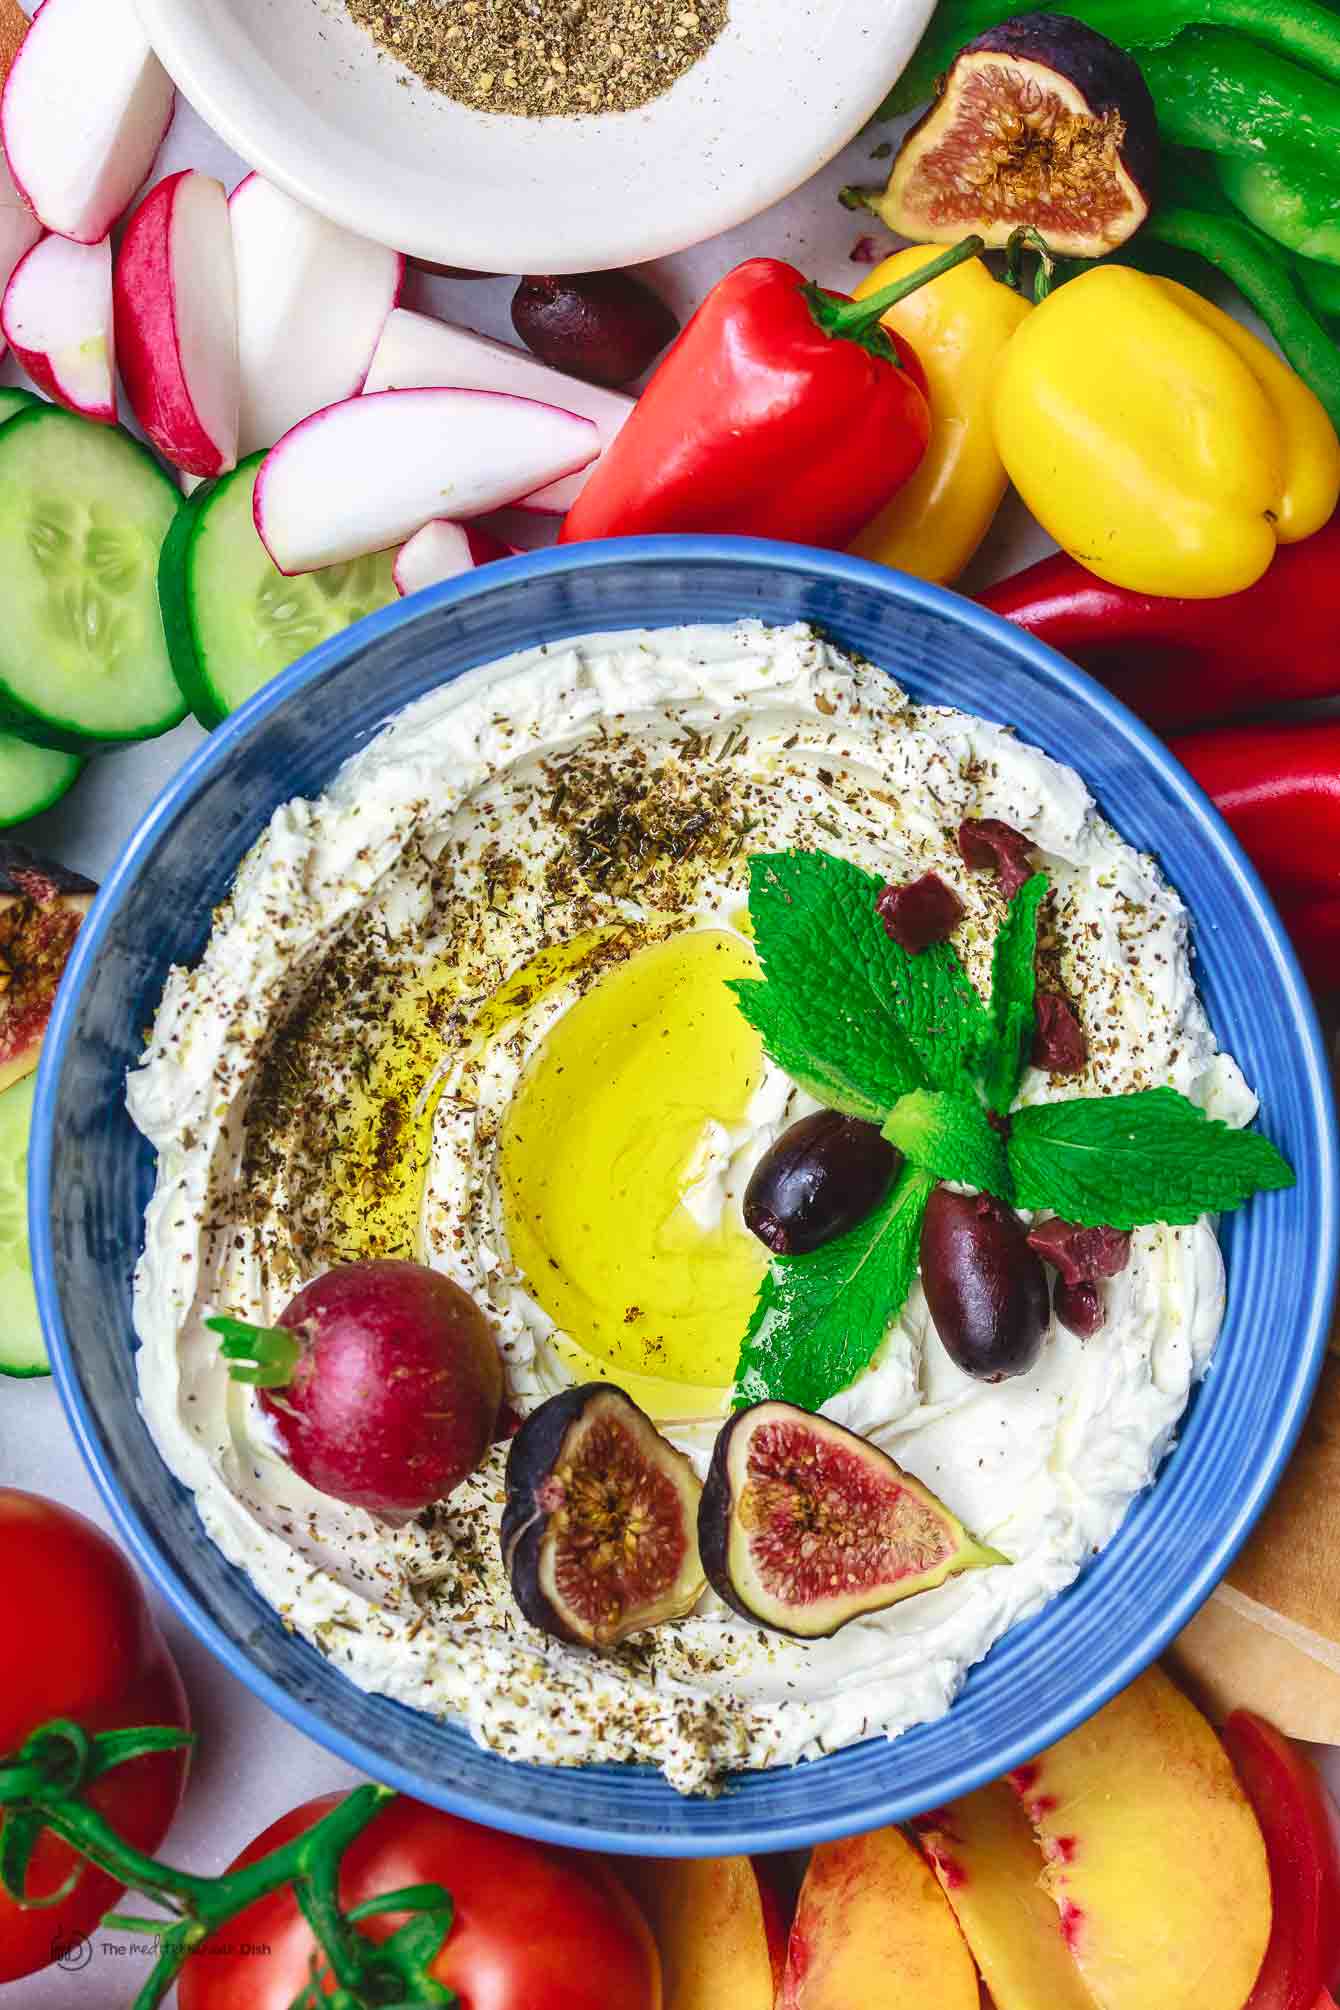 Homemade Labneh Recipe | The Mediterranean Dish. Homemade labneh, Middle Eastern yogurt cheese that is tangy, creamy and lighter than your average cream cheese. Use it as mezze or to spread on your favorite bread. Versatile and super easy to make! A two-step recipe from TheMediterraneanDish.com